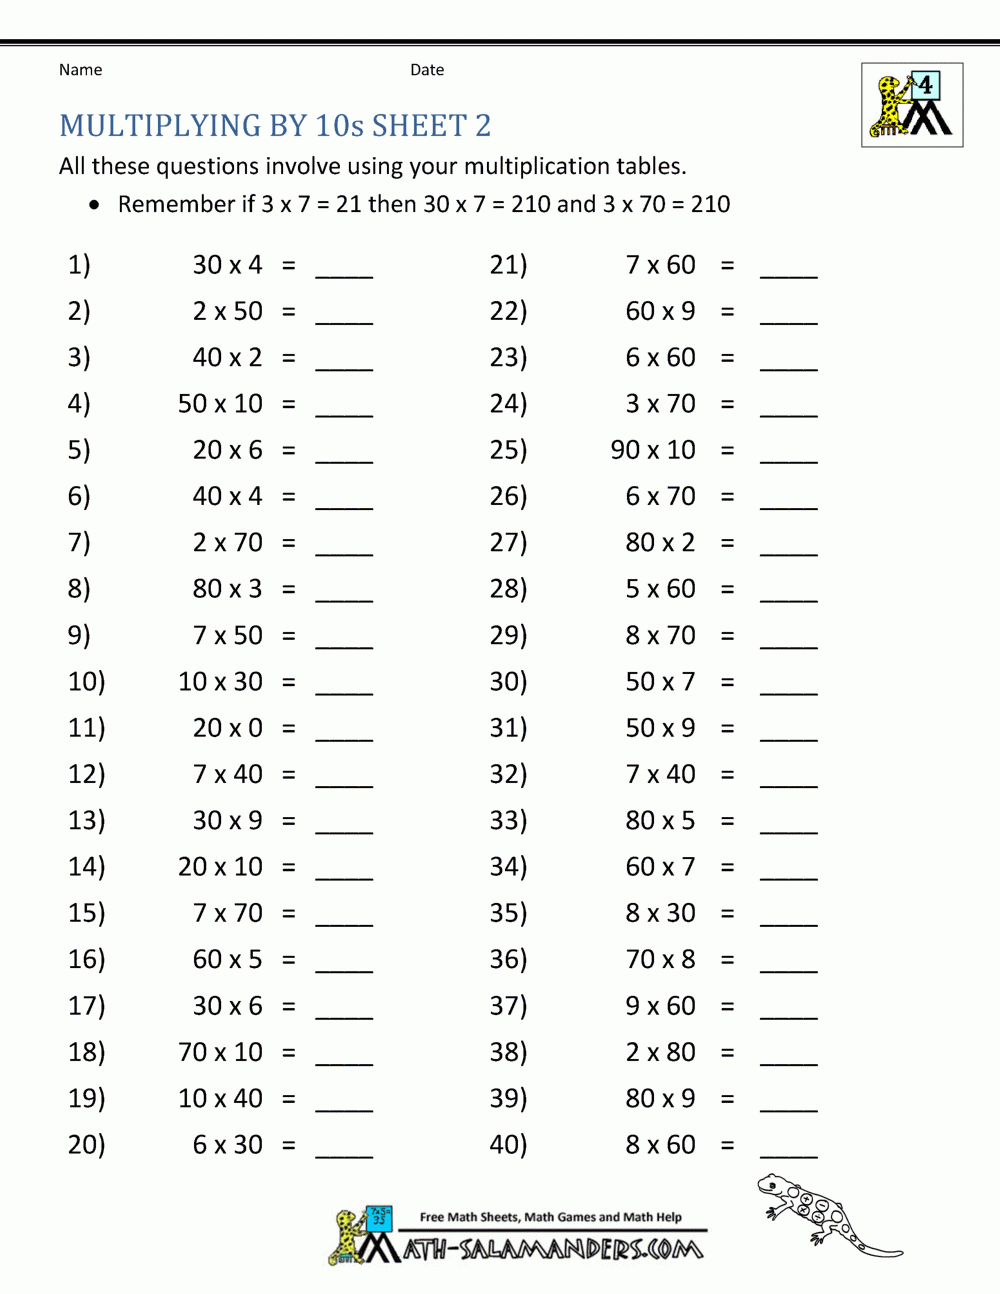 Multiply By Multiples Of 10 Worksheets